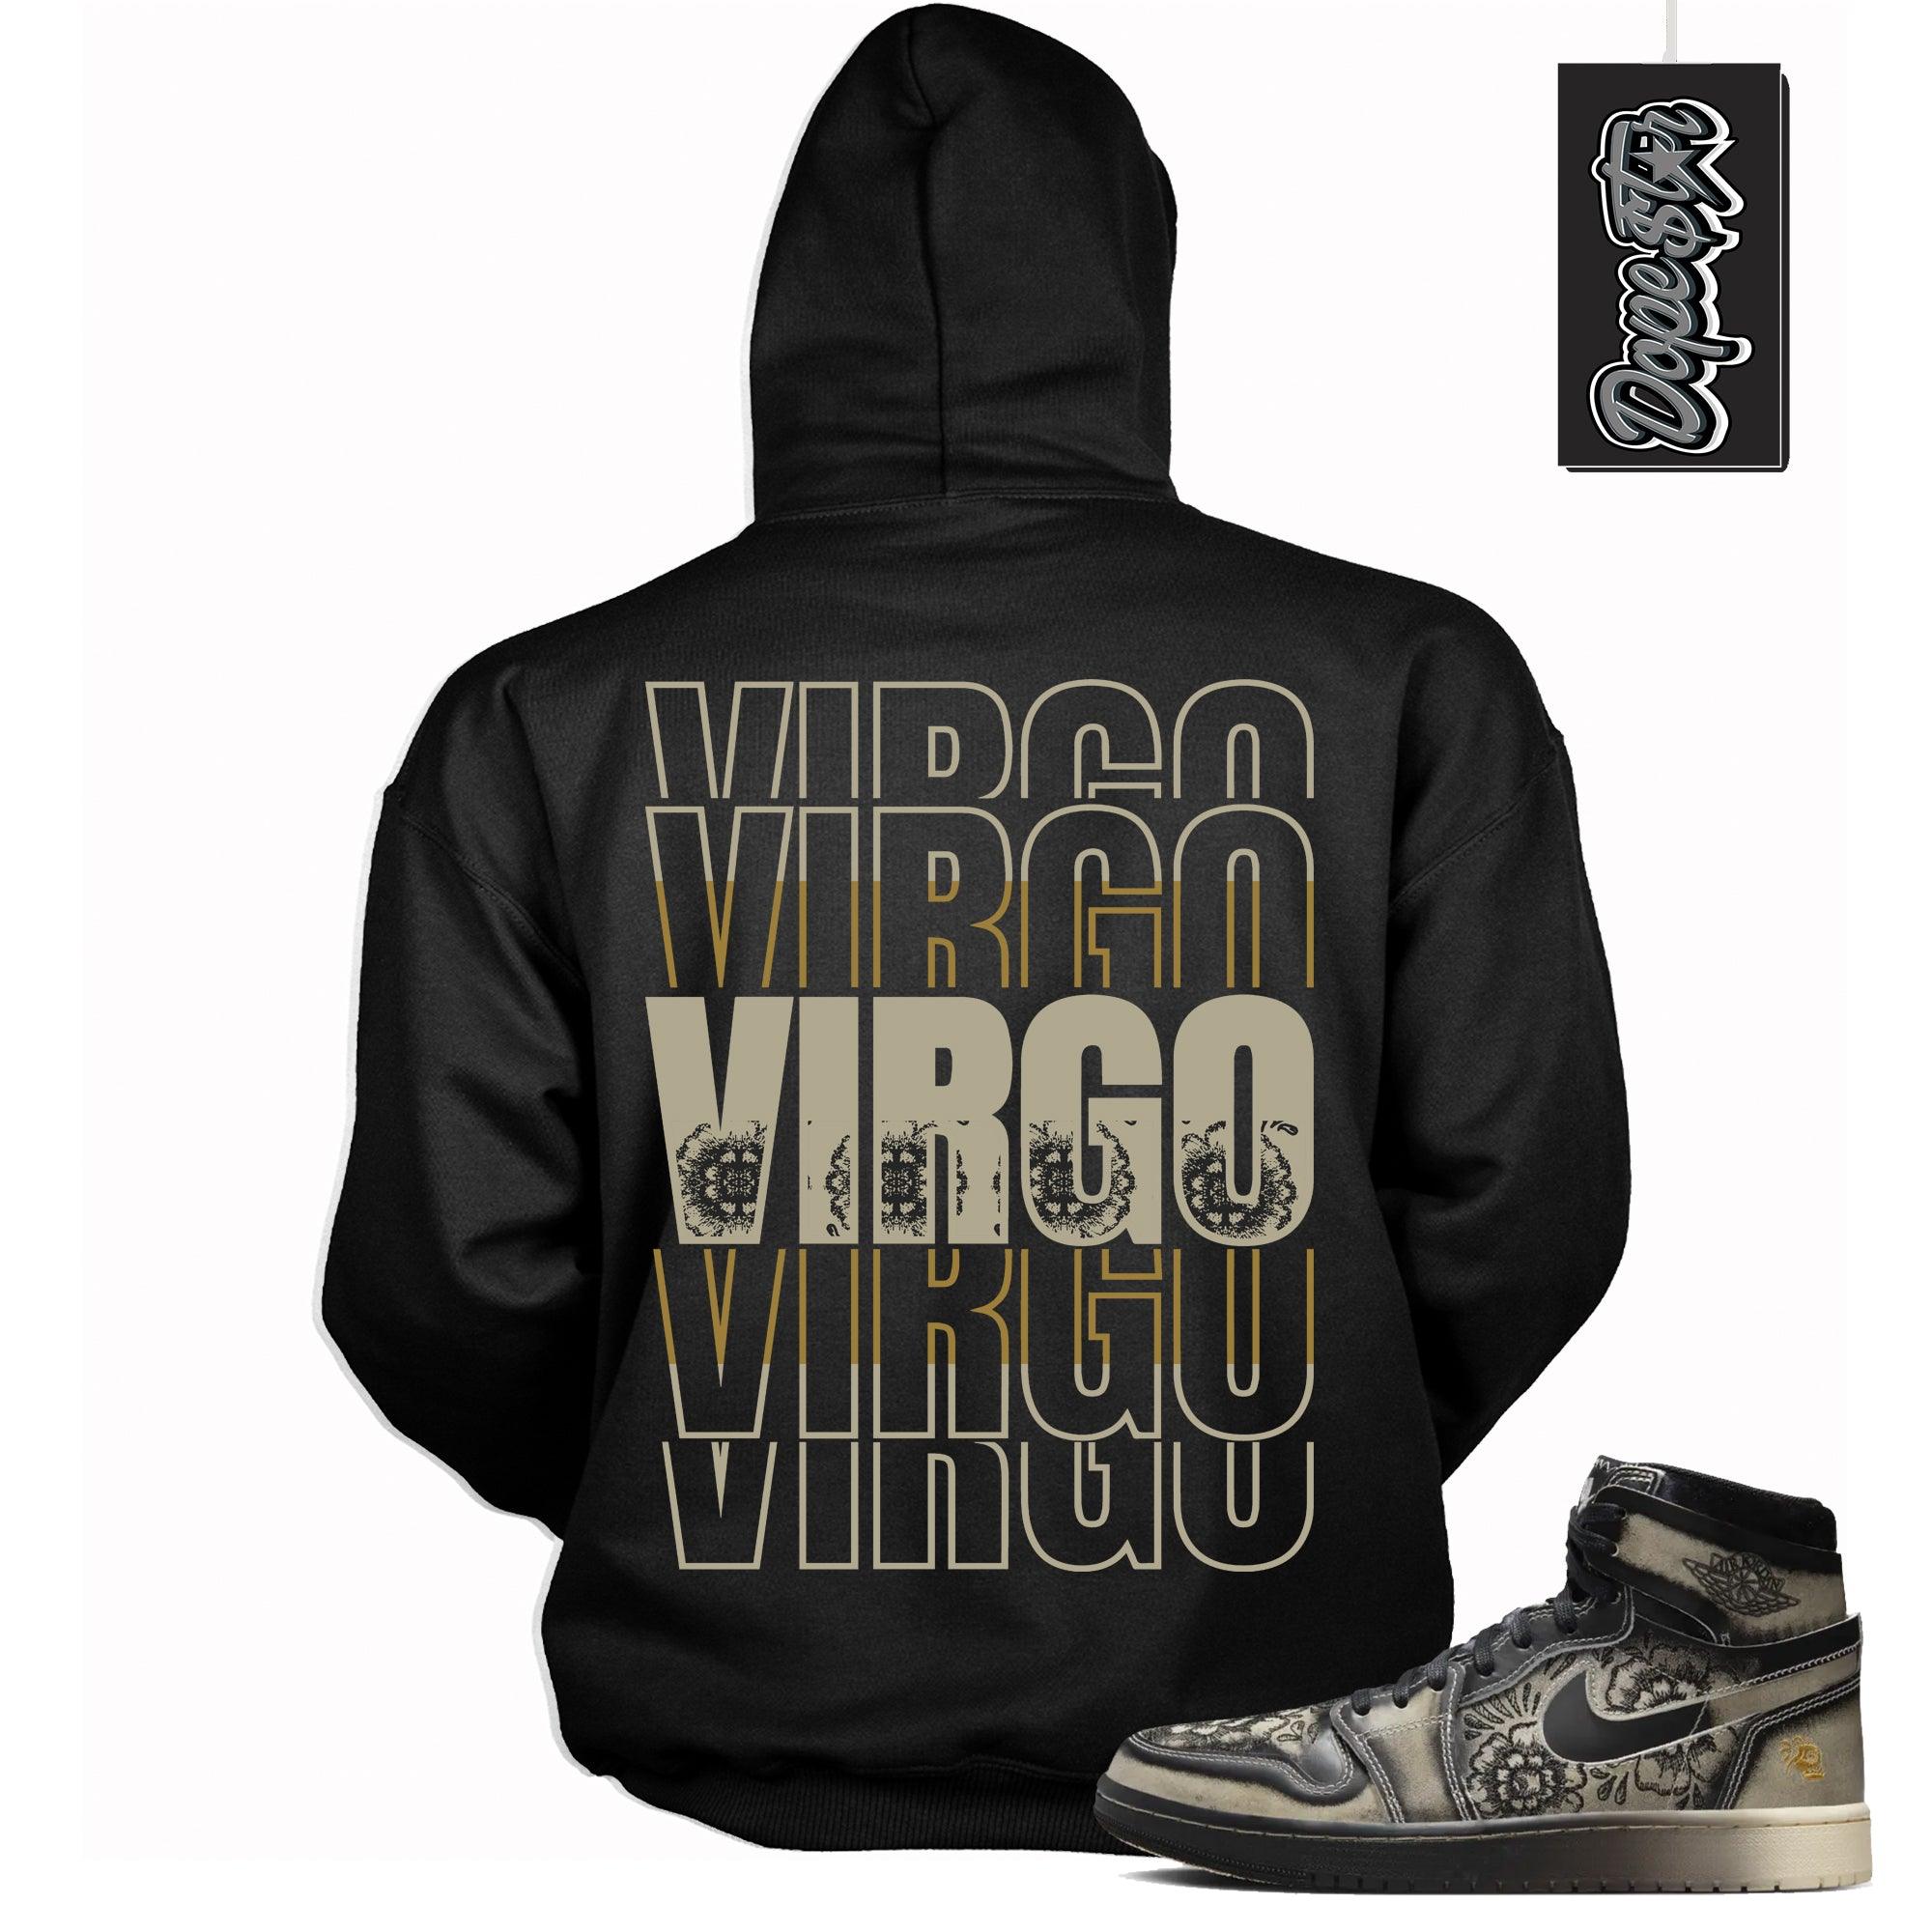 Cool Black Graphic Hoodie with “ VIRGO “ print, that perfectly matches Air Jordan 1 High Zoom Comfort 2 Dia de Muertos Black and Pale Ivory sneakers